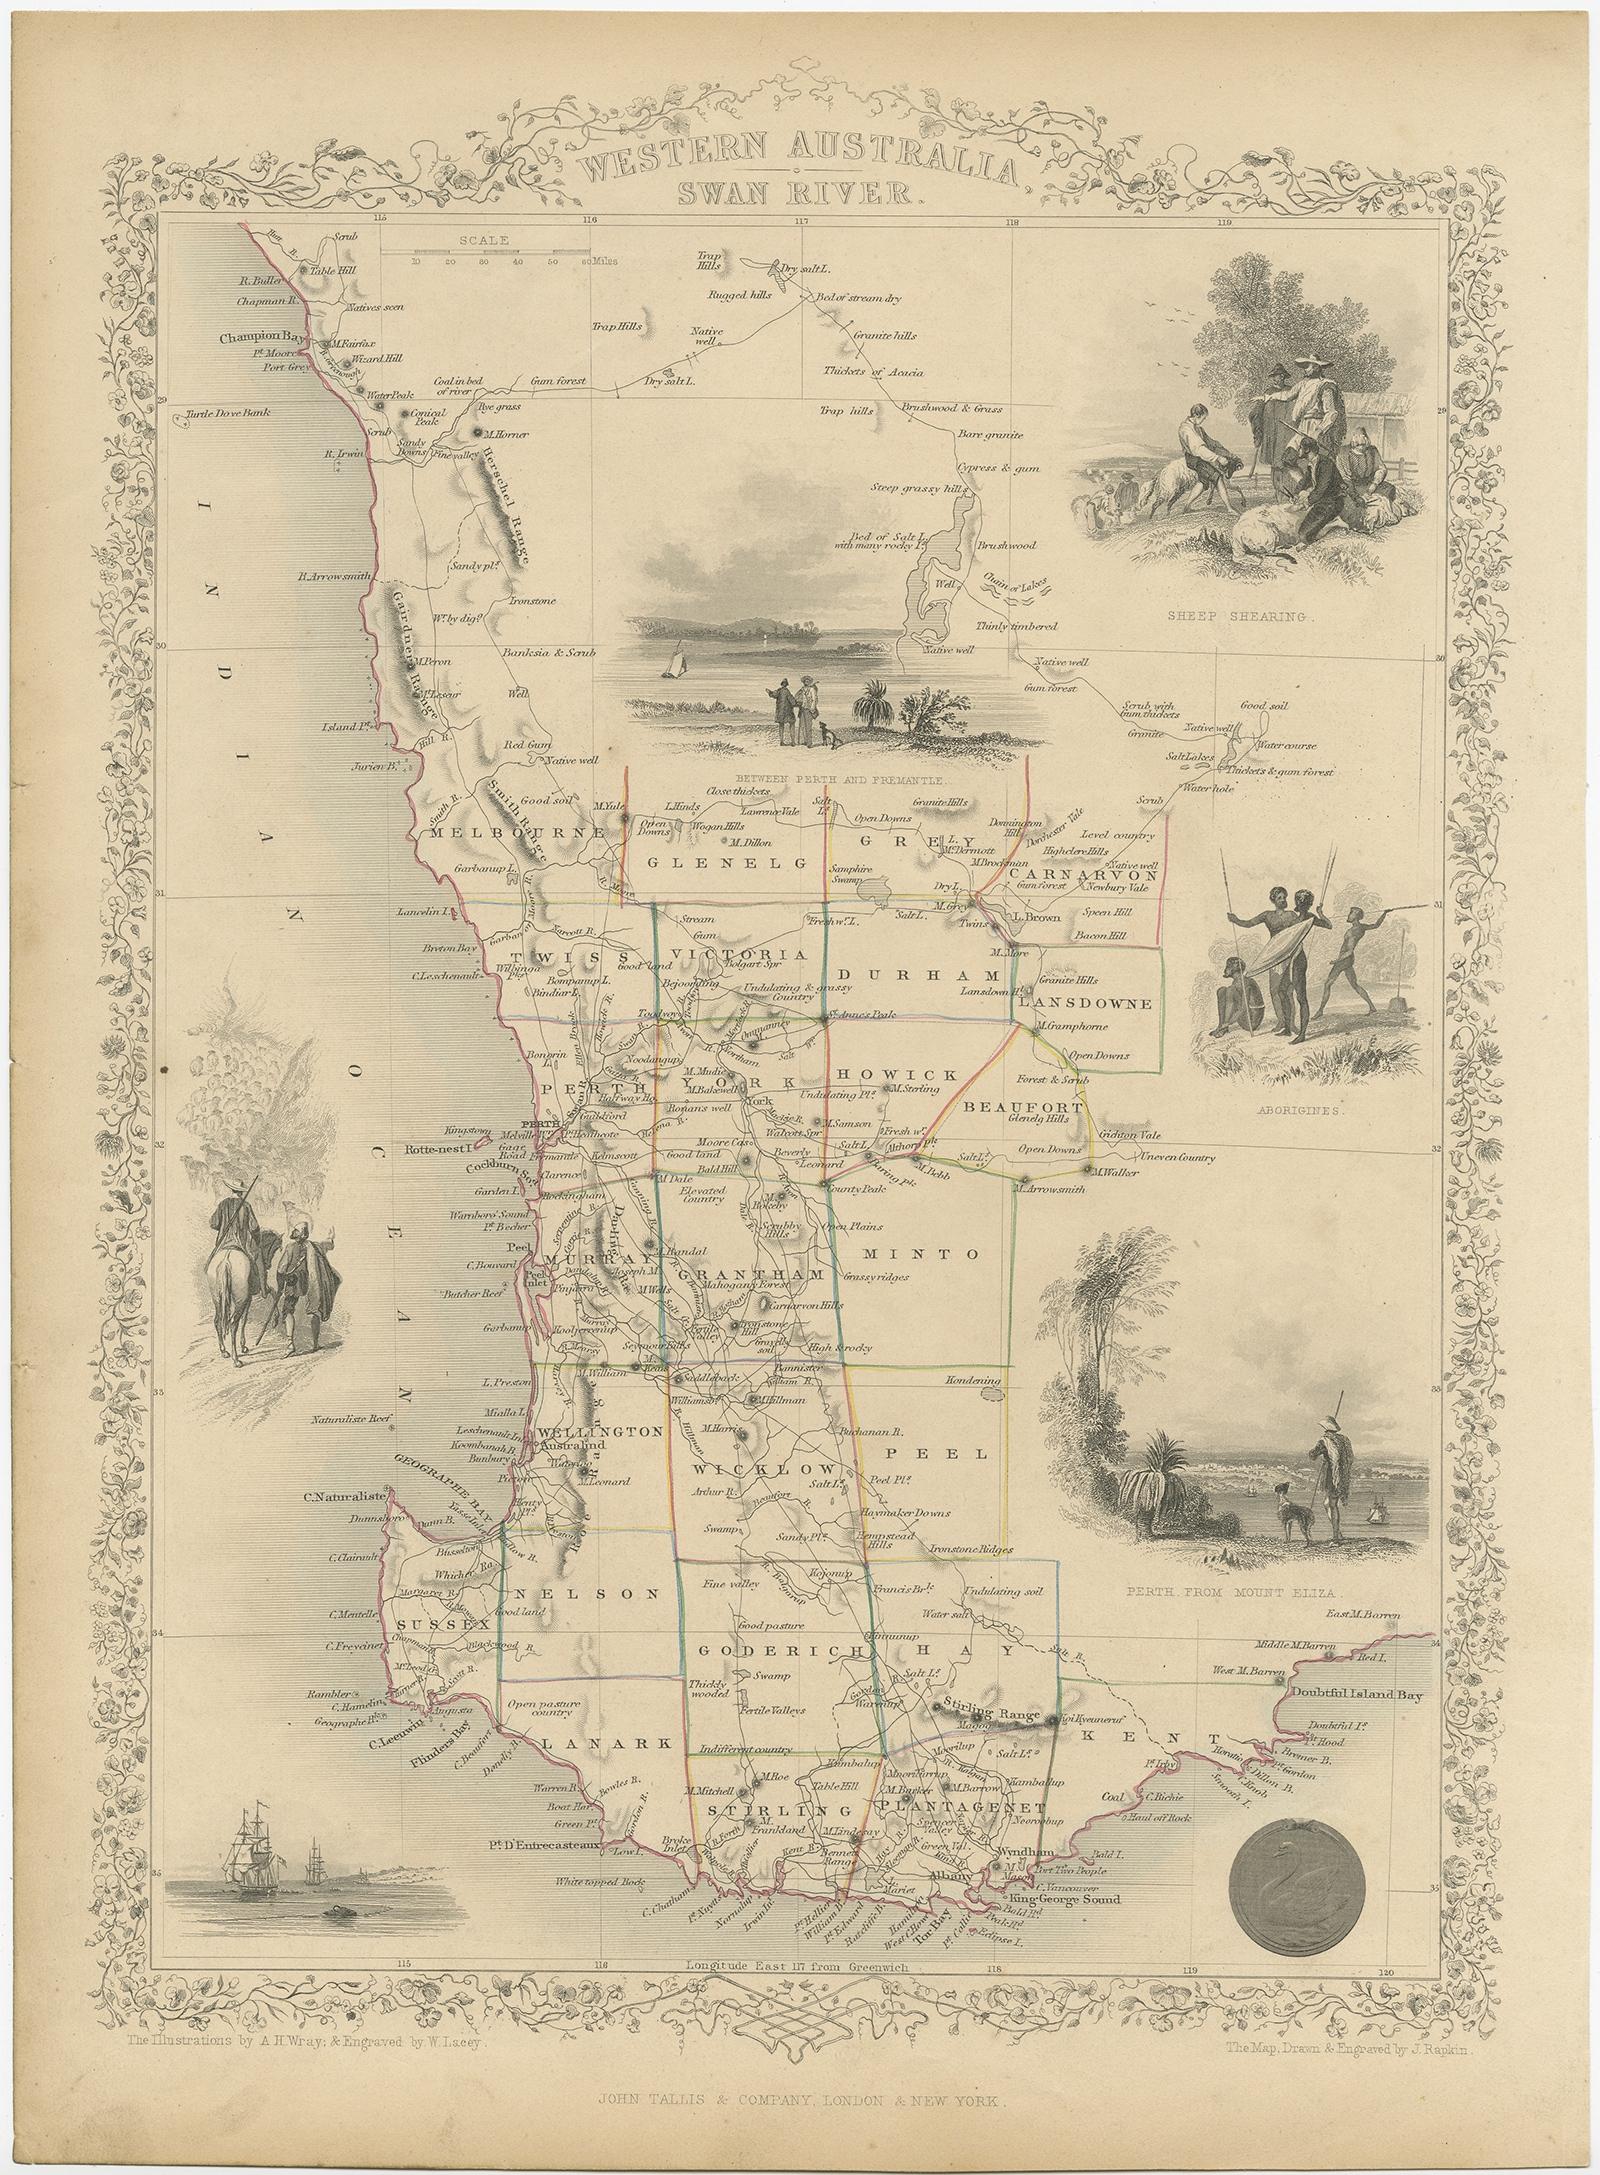 Antique map titled 'Western Australia, Swan River'. Map of Western Australia and Swan River, surrounded by illustrations of Perth, Aborigines and sheep shearing. With the seal of Western Australia. Originates from 'The Illustrated Atlas, And Modern